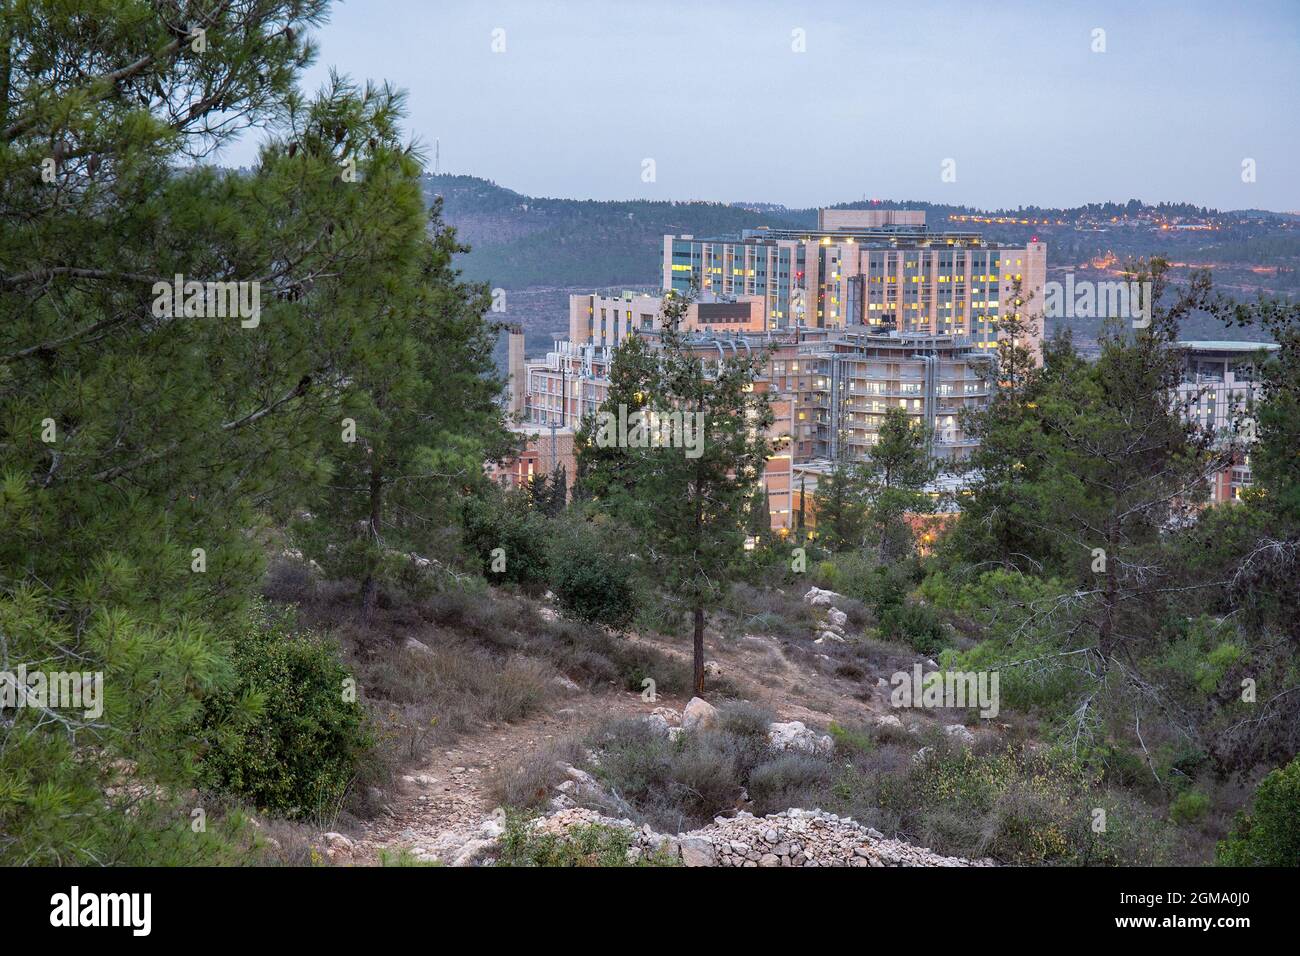 Jerusalem, Israel - October 10th, 2018: Hadassah hospital, located on the outskirts of Jerusalem, Israel, surrounded by pine forests, on a clear eveni Stock Photo